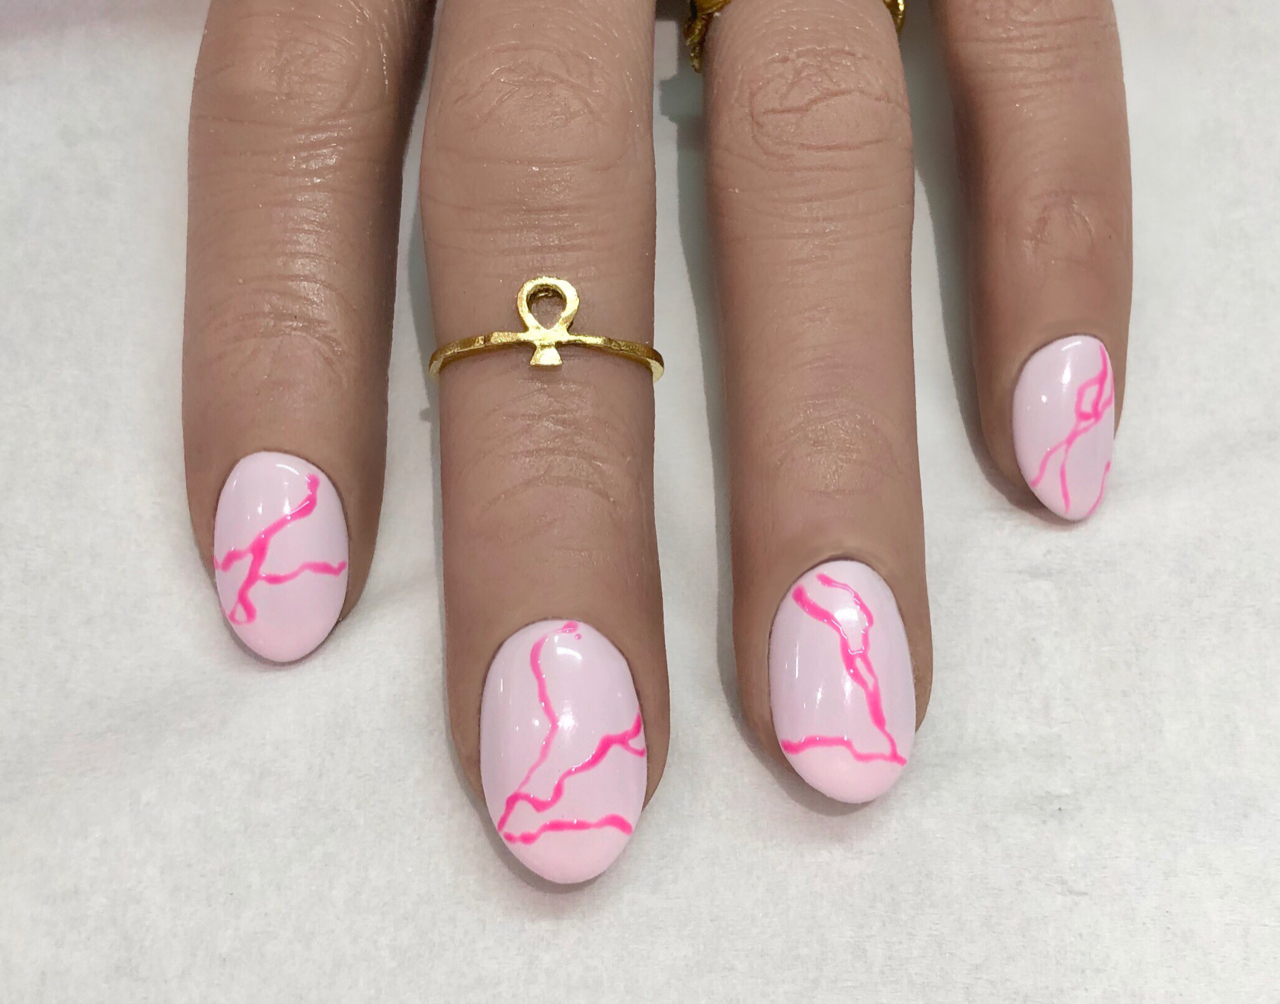 Salon System Gellux Breast Cancer Awareness Month Nails